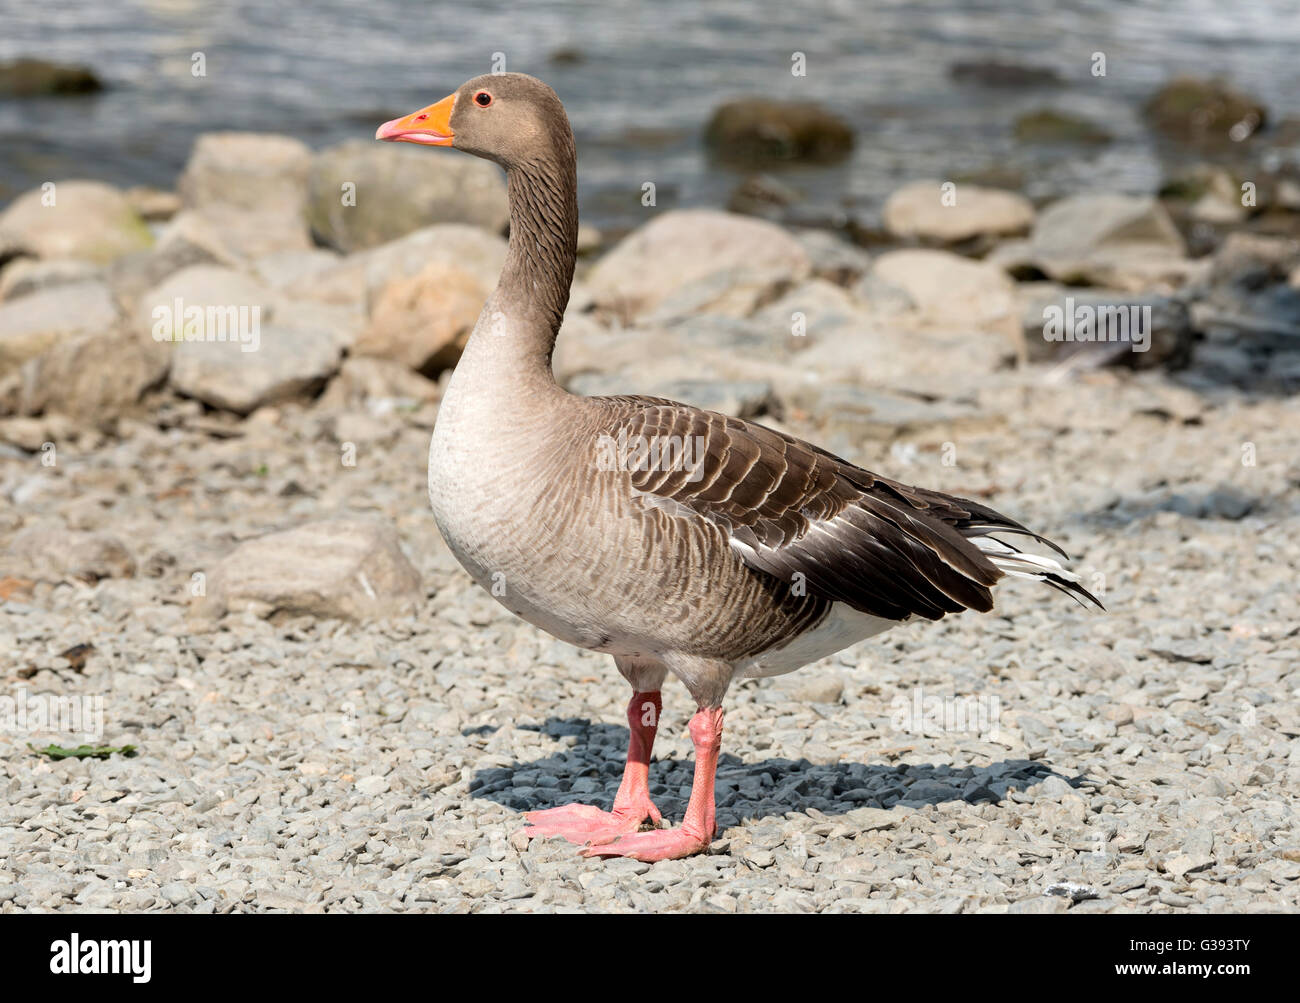 Greylag Goose standing on a shingle beach on a sunny day Stock Photo